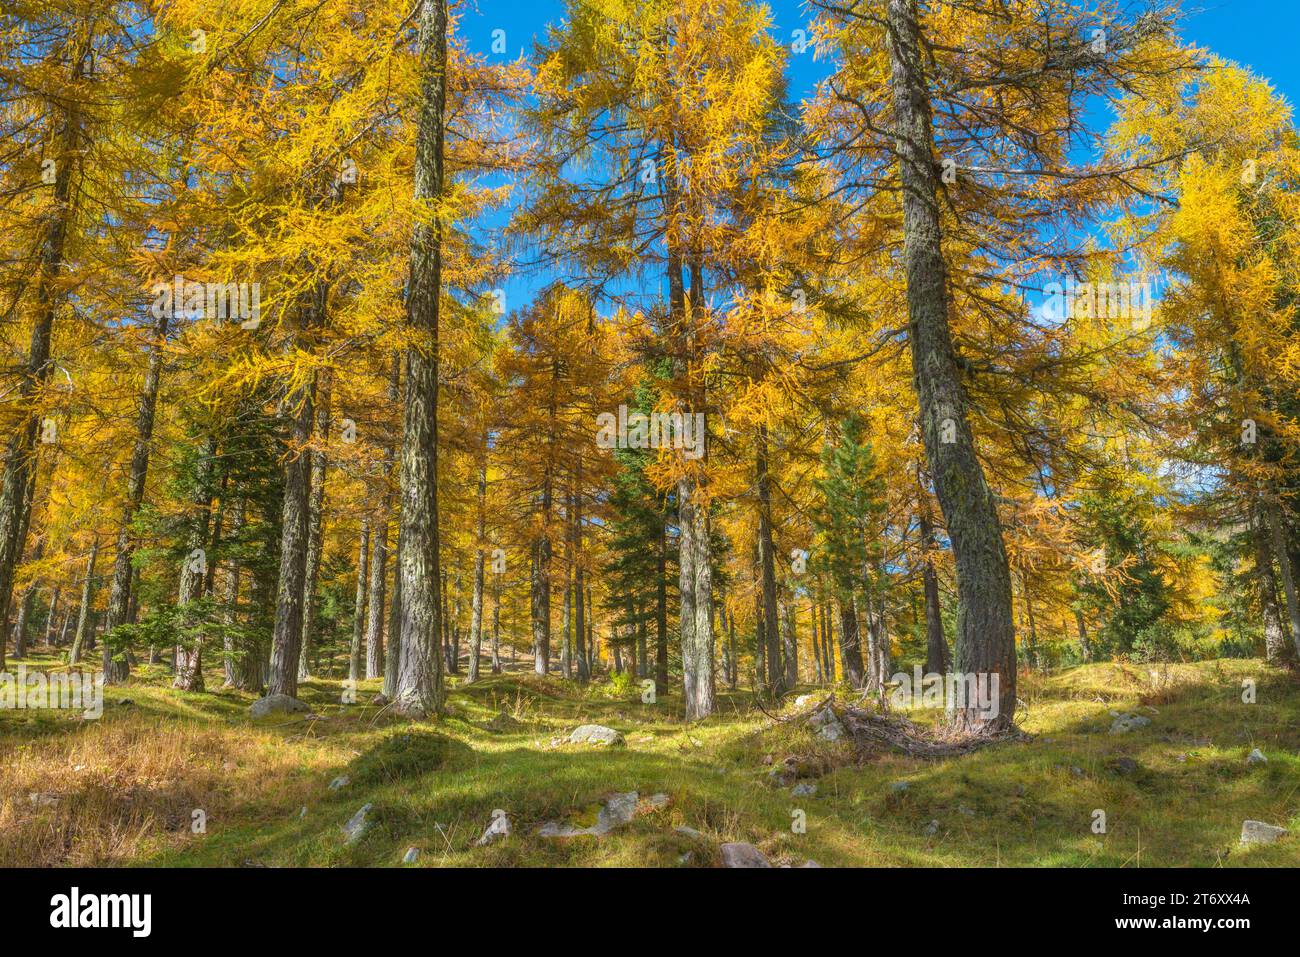 Vivid larch forest in autumn, beautiful mountain woods in full fall vegetation with all yellow trees Stock Photo